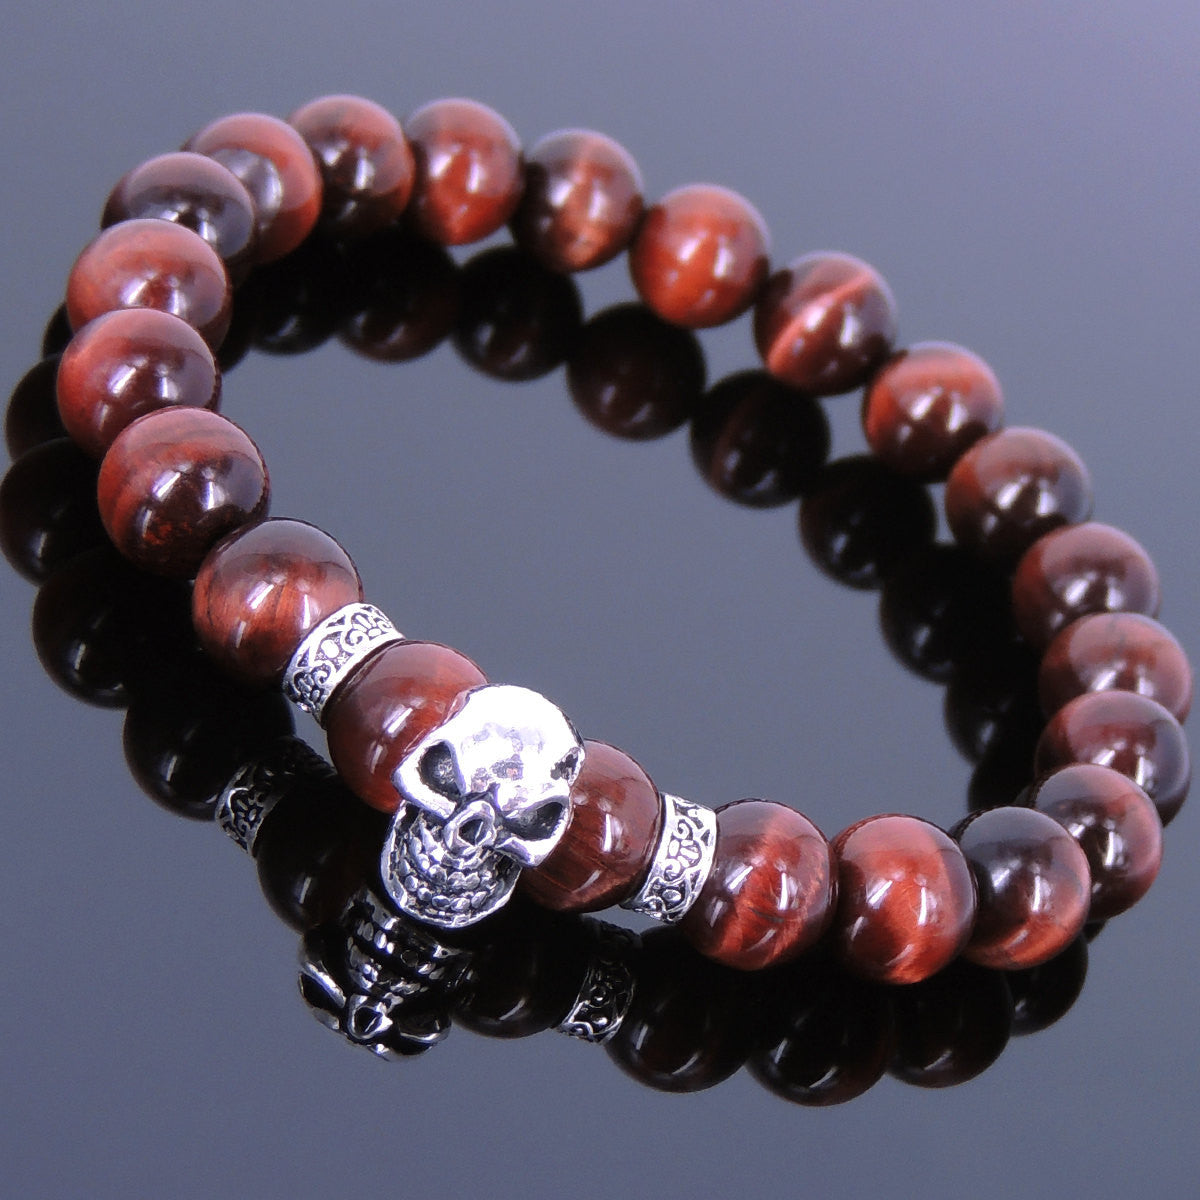 8mm Red Tiger Eye Healing Gemstone Bracelet with S925 Sterling Silver Celtic Spacers & Protection Skull Bead - Handmade by Gem & Silver BR352E